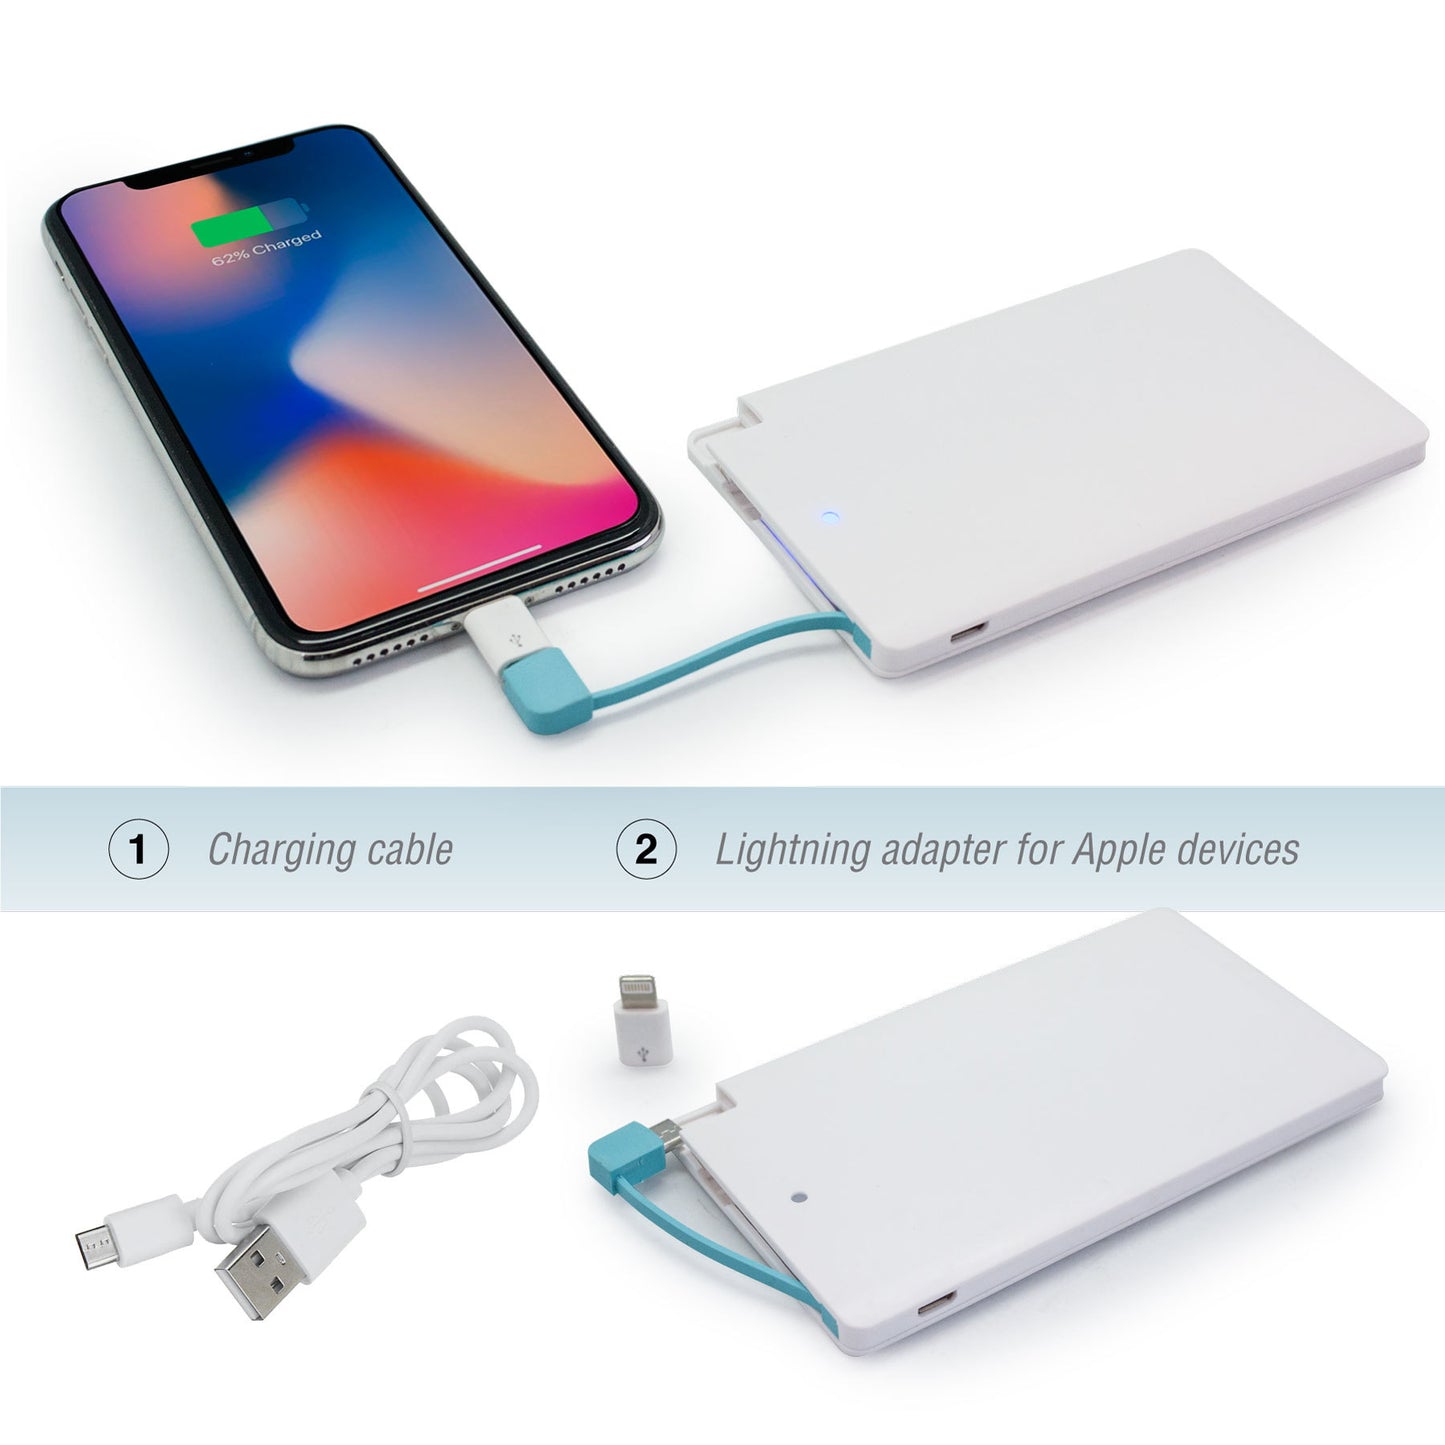 Emory 2500 mAh Slim Portable Power Bank with Cable